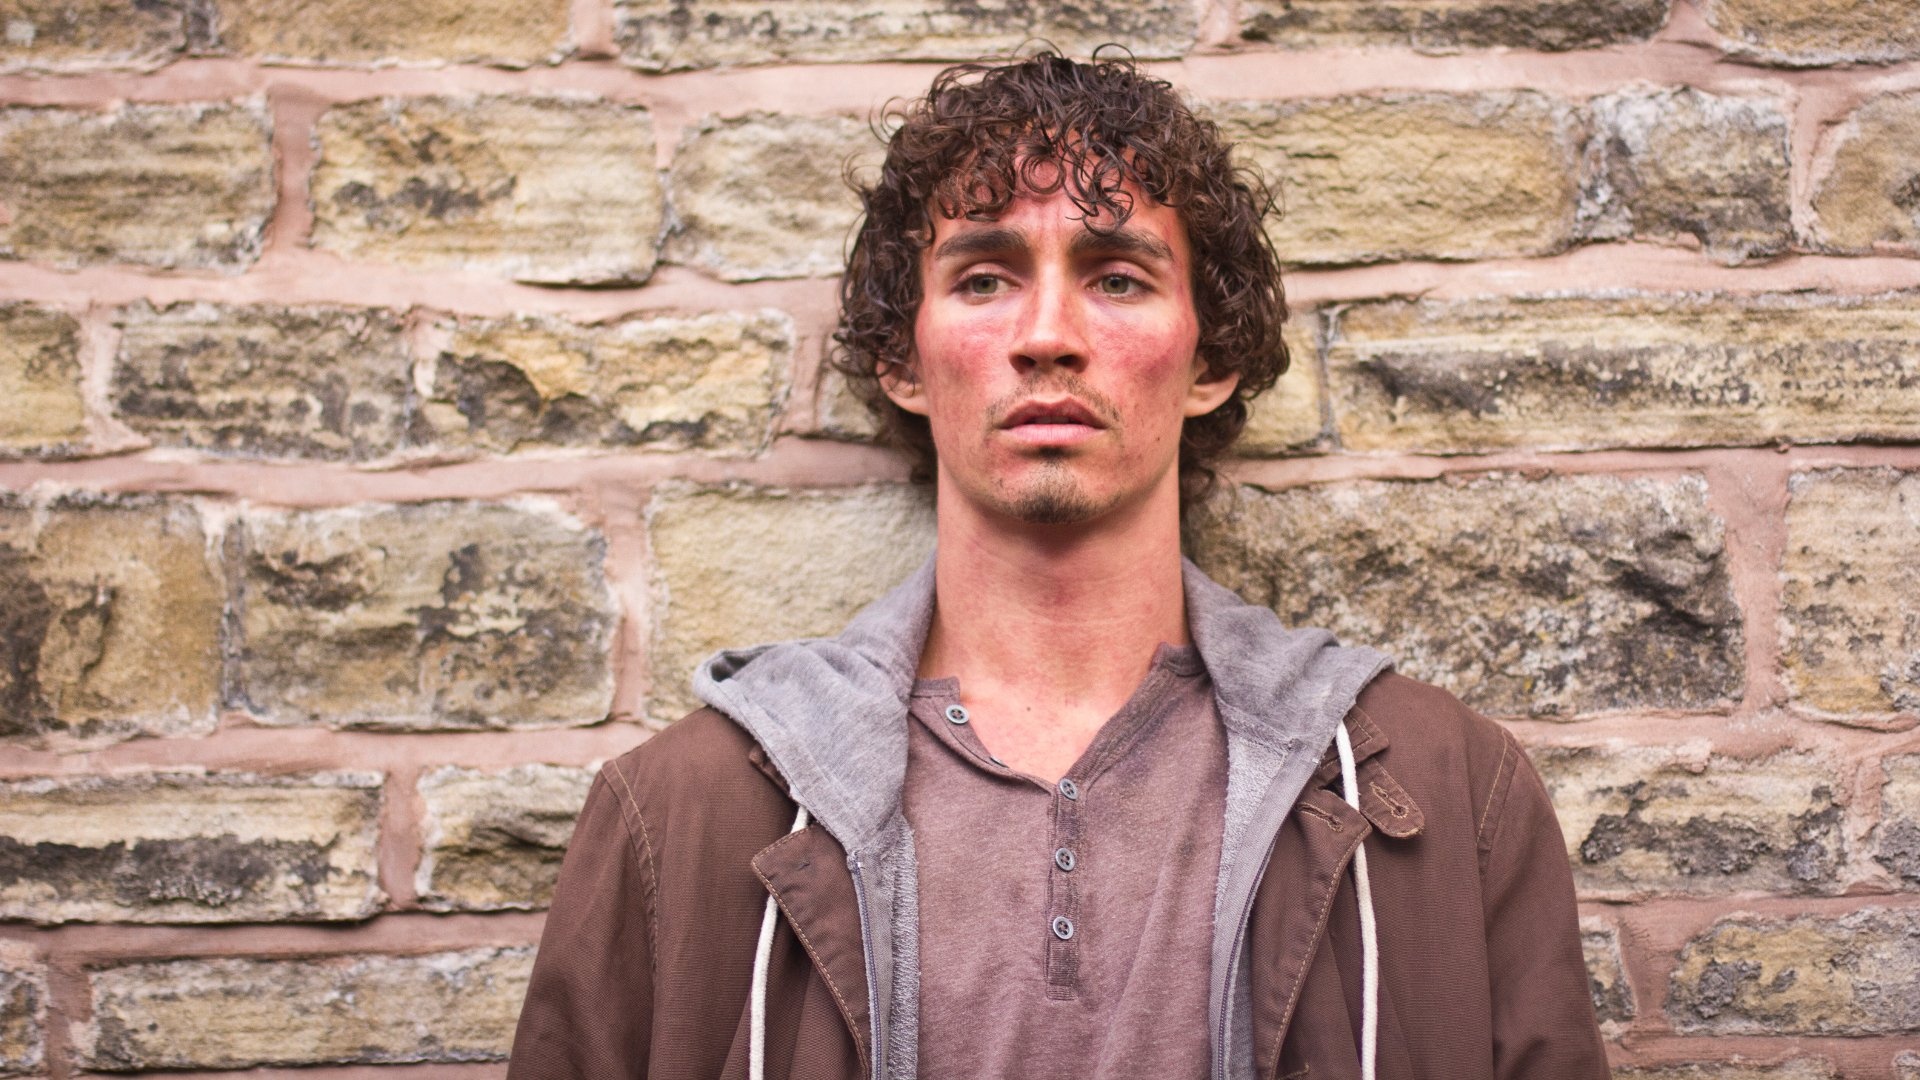 Interview with The Messenger star Robert Sheehan, Candid conversation, Acting process, Fascinating insights, 1920x1080 Full HD Desktop